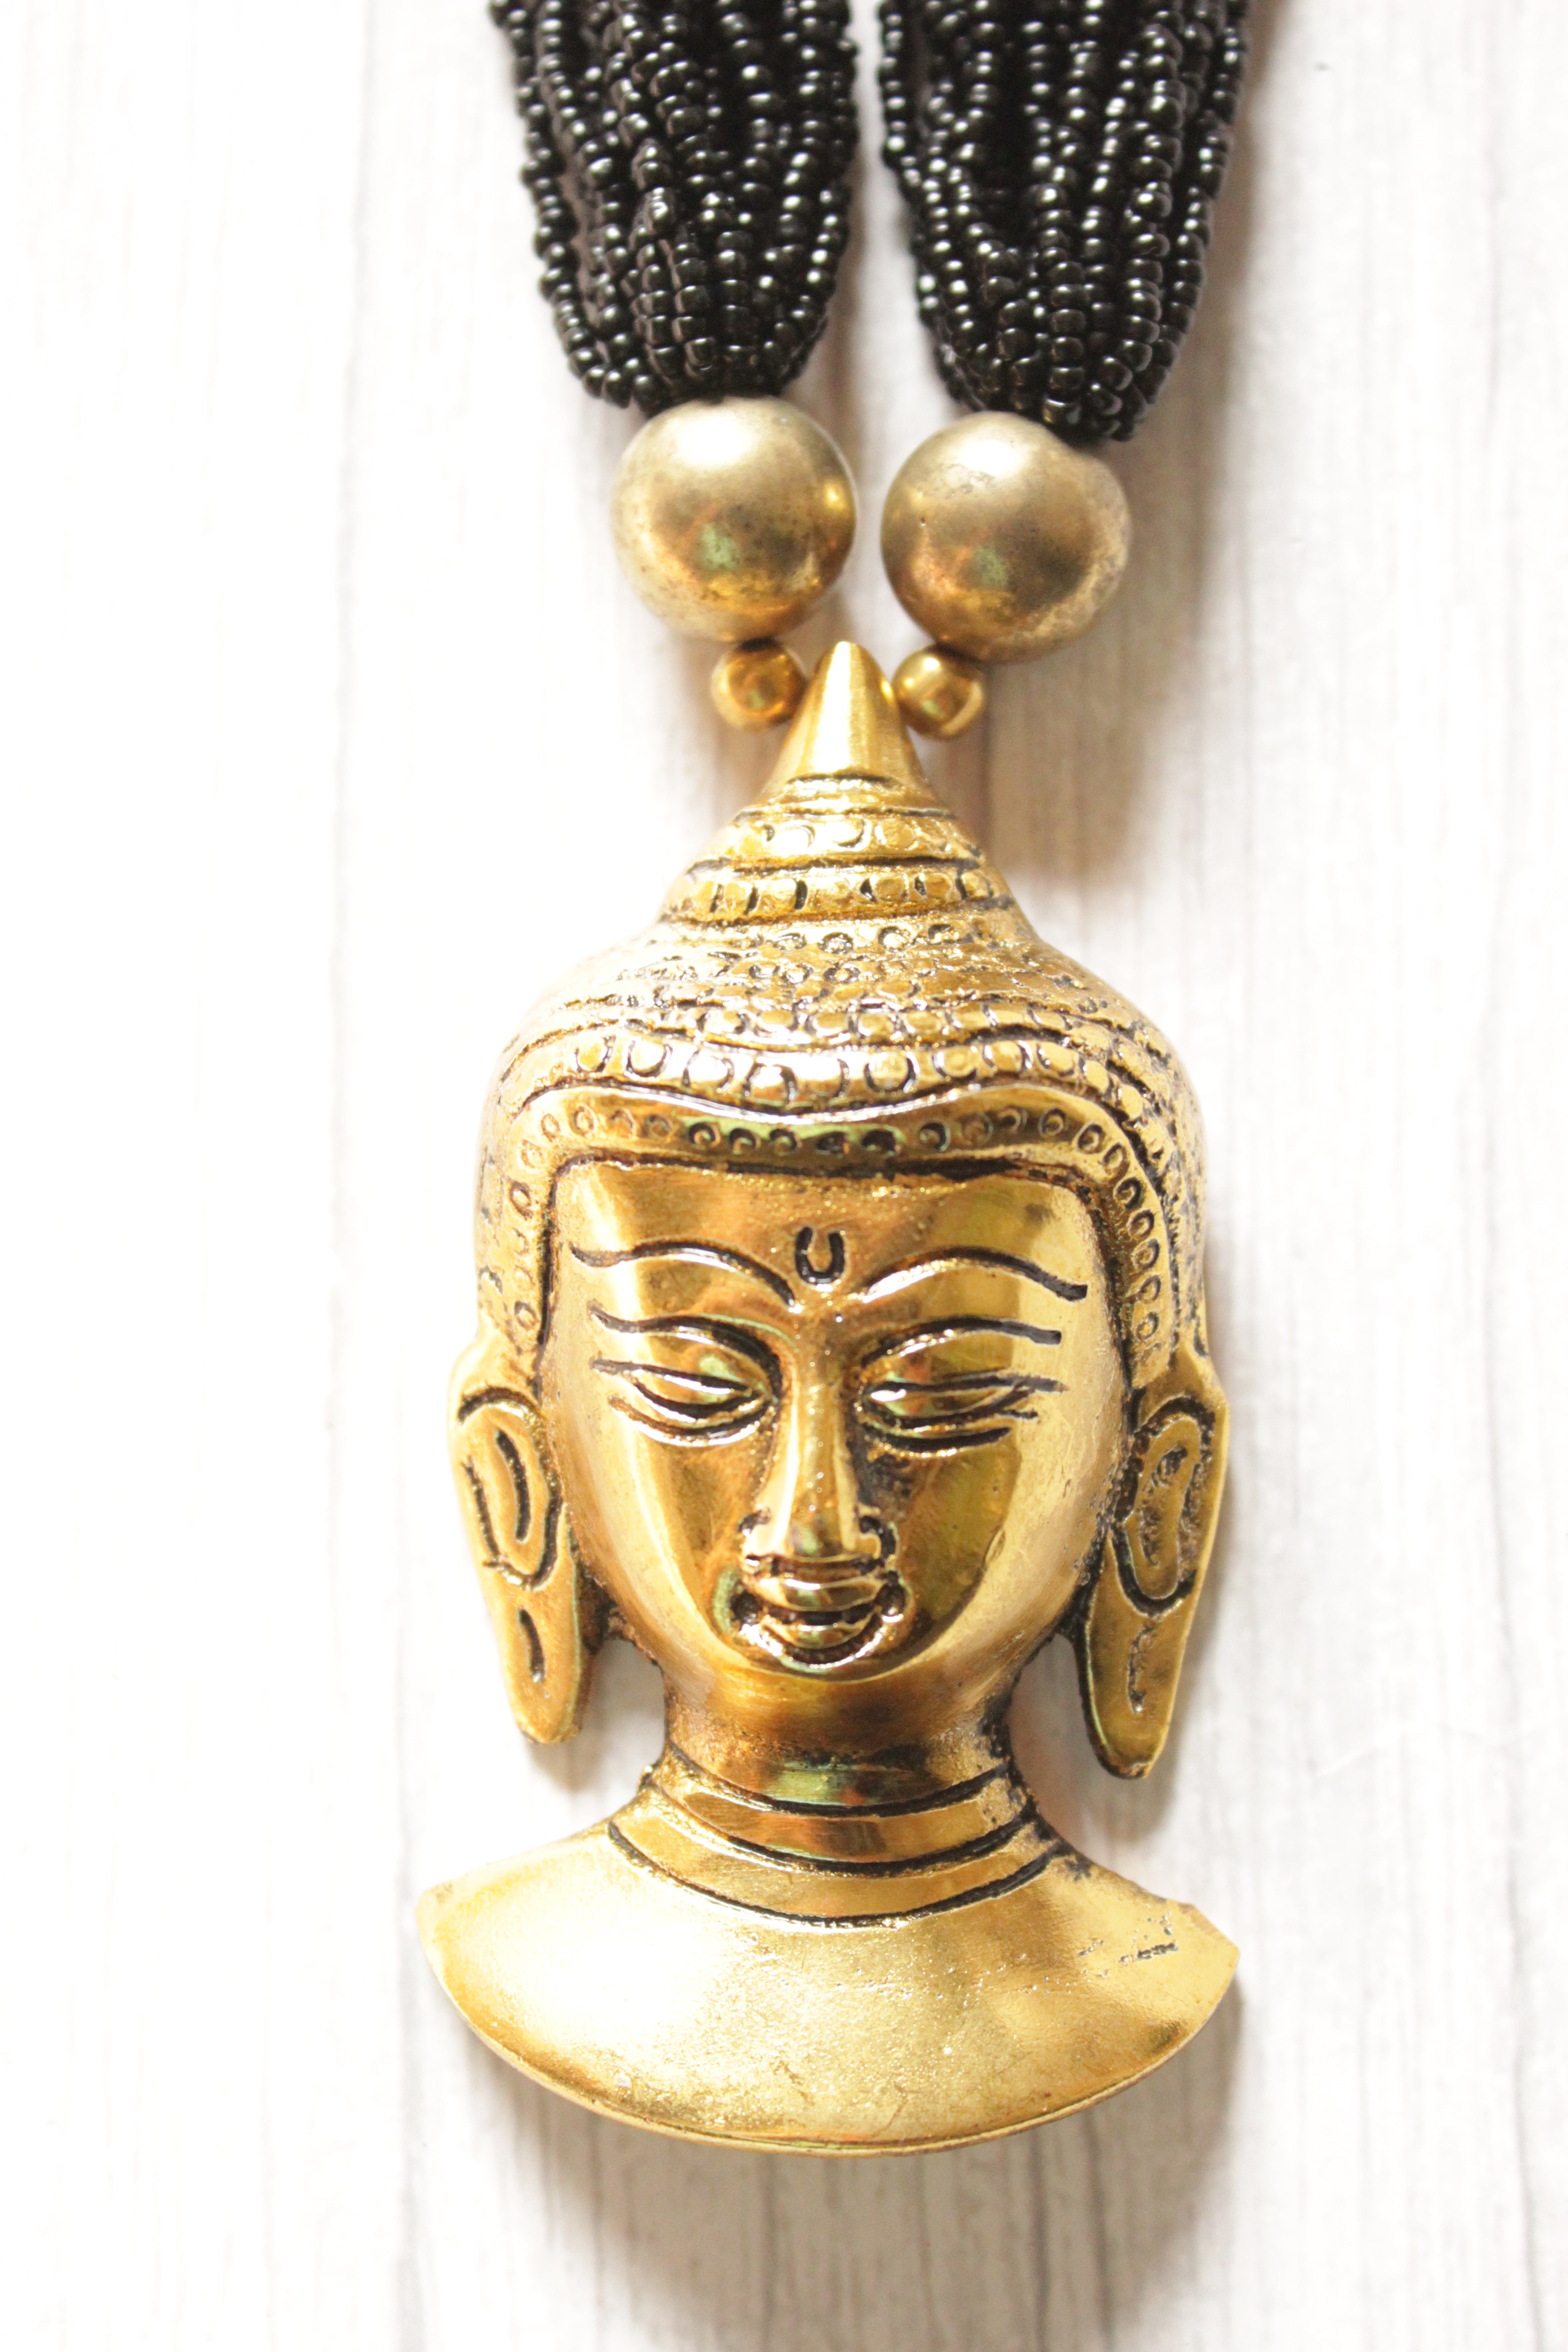 Black Beads Handcrafted Long Buddha Pendant Necklace